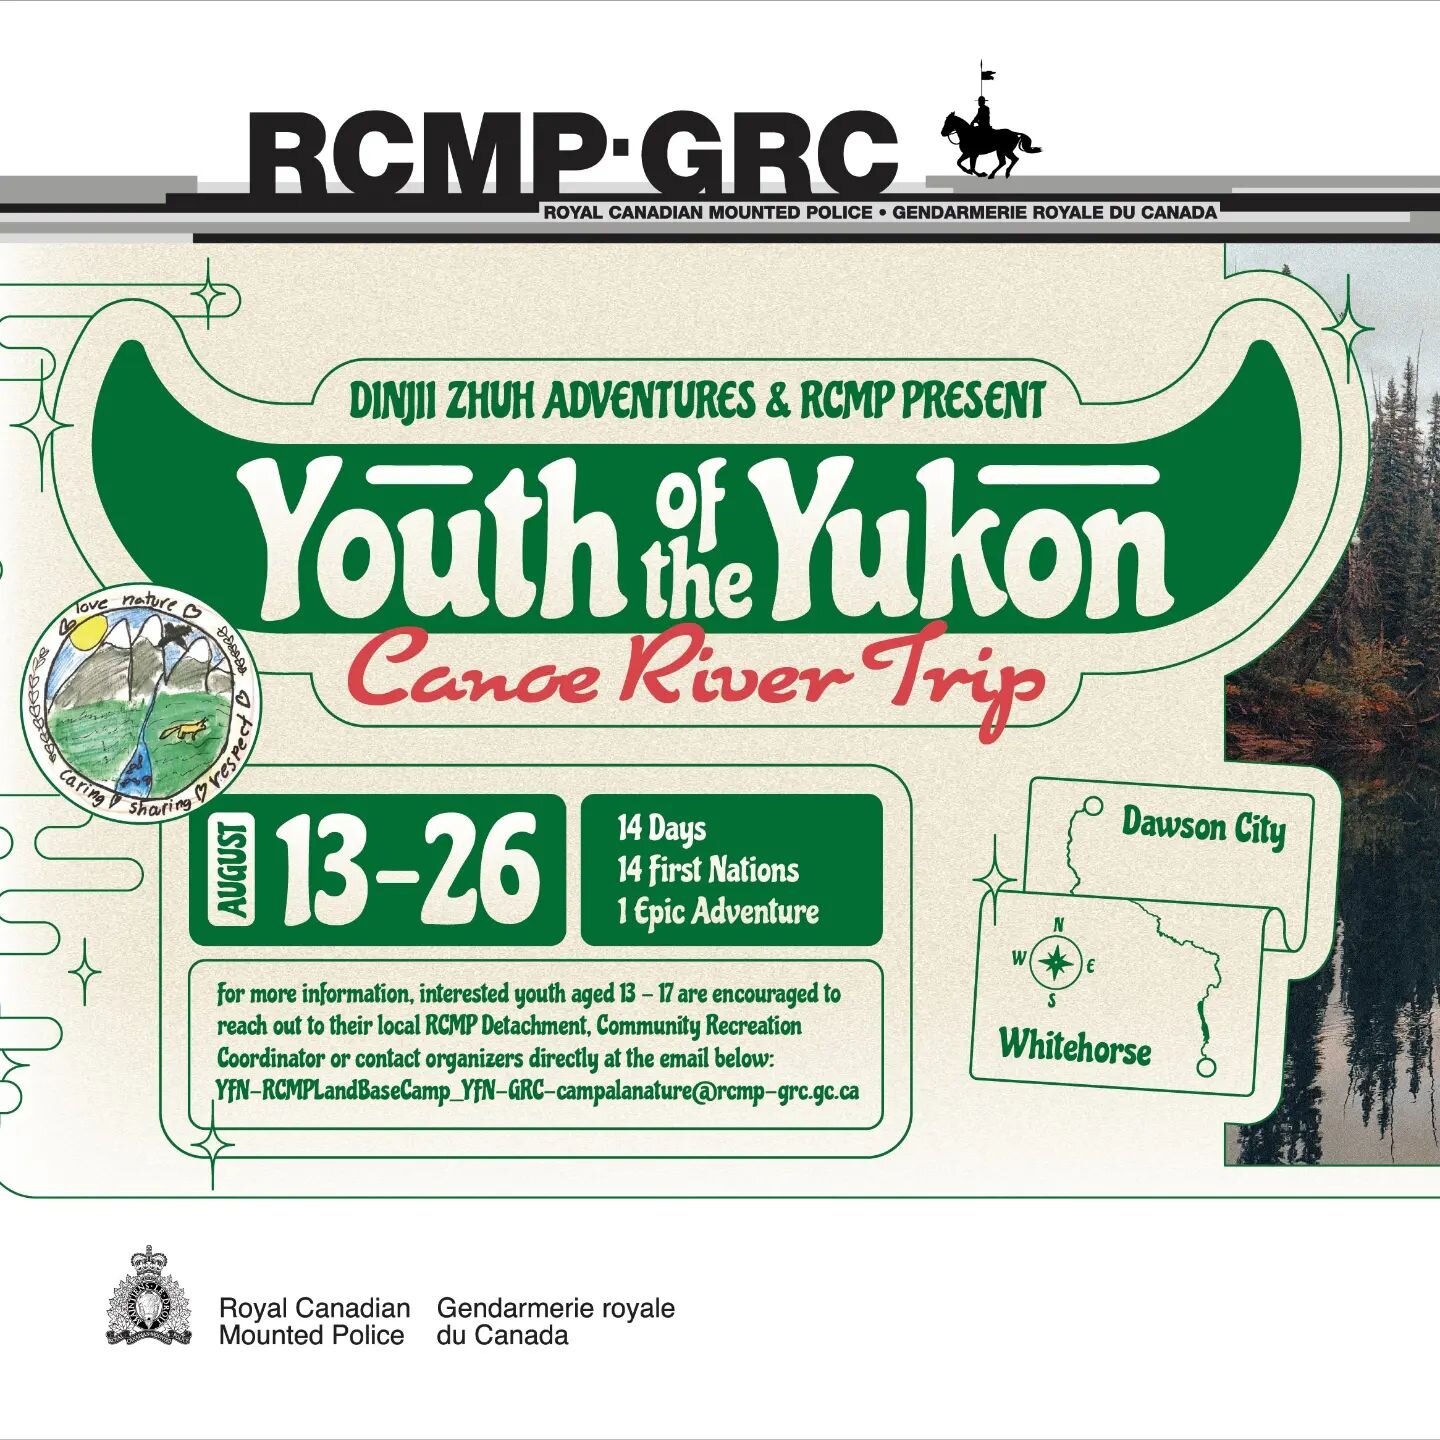 It's all happening, 

Please keep our team and youth in your prayers as we make our way down the Yukon River from Whitehorse to Dawson City!!! 

Also, make sure you follow our journey and say hi, as we past through your community heyyy!!!